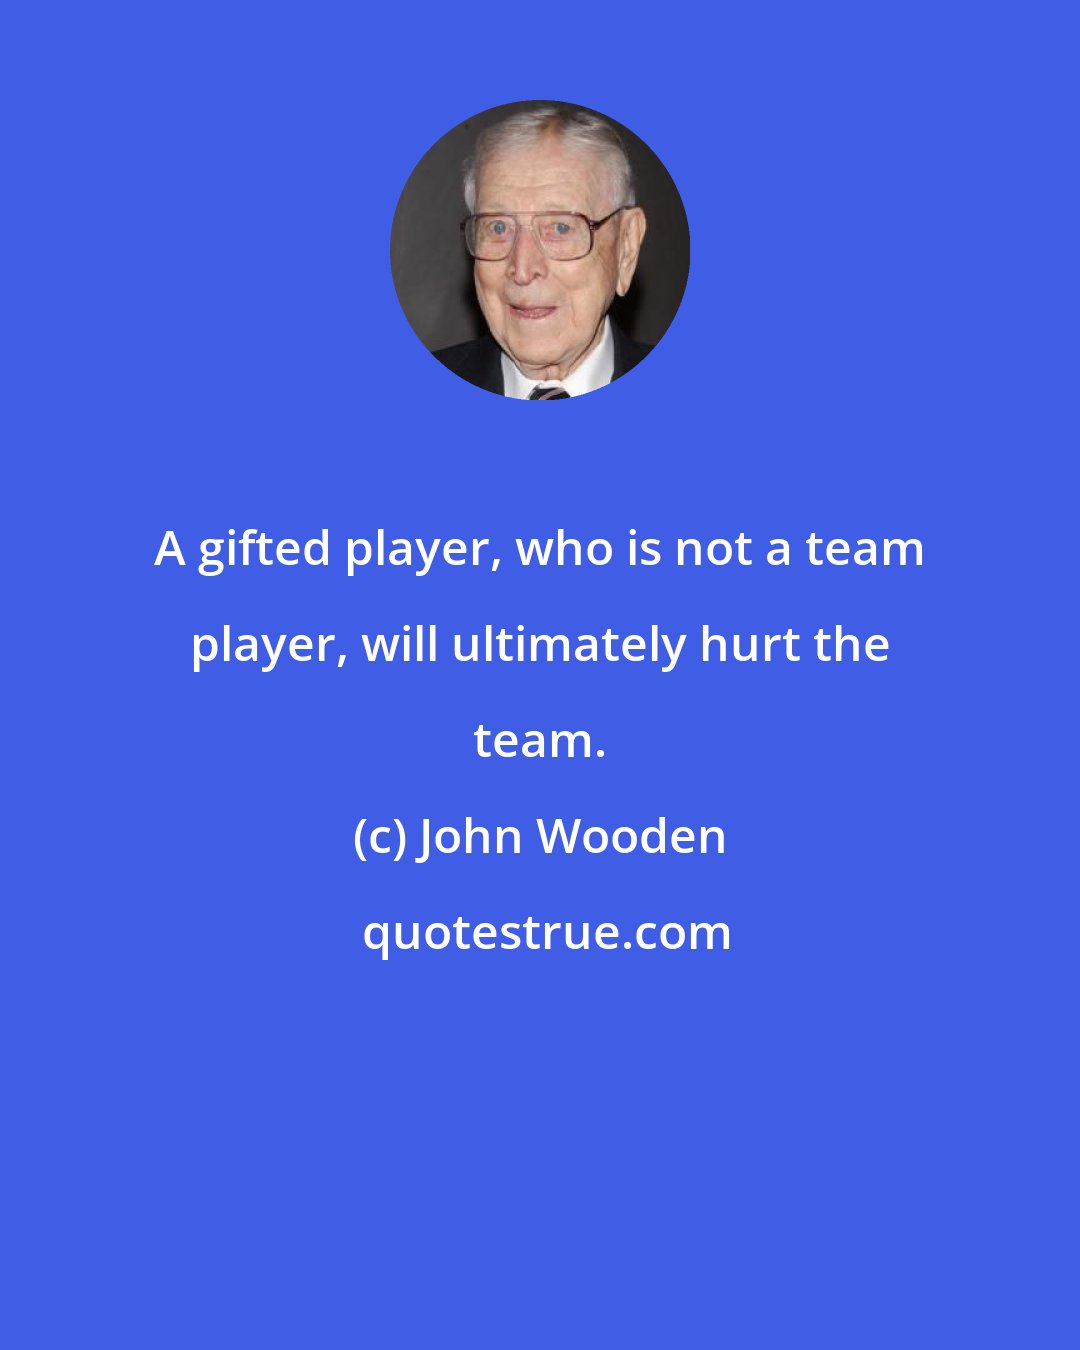 John Wooden: A gifted player, who is not a team player, will ultimately hurt the team.